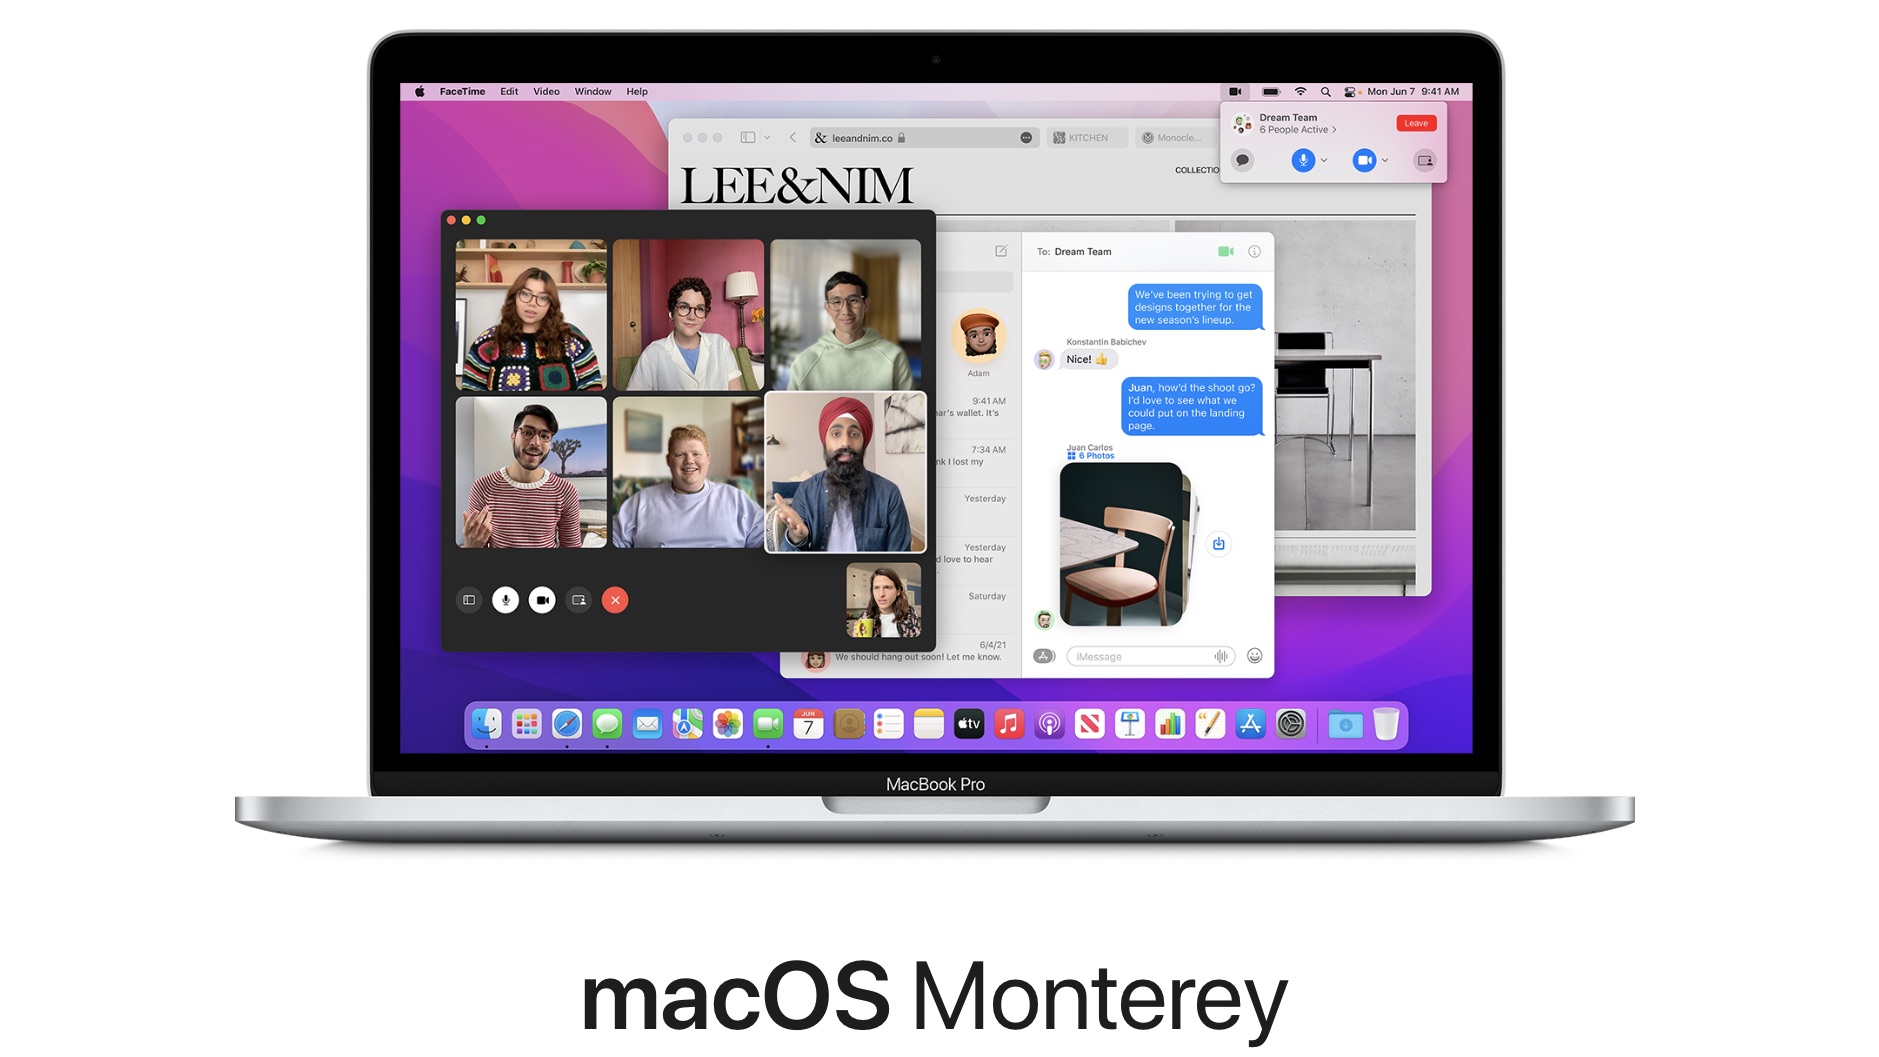 How to Install the macOS Monterey Public Beta